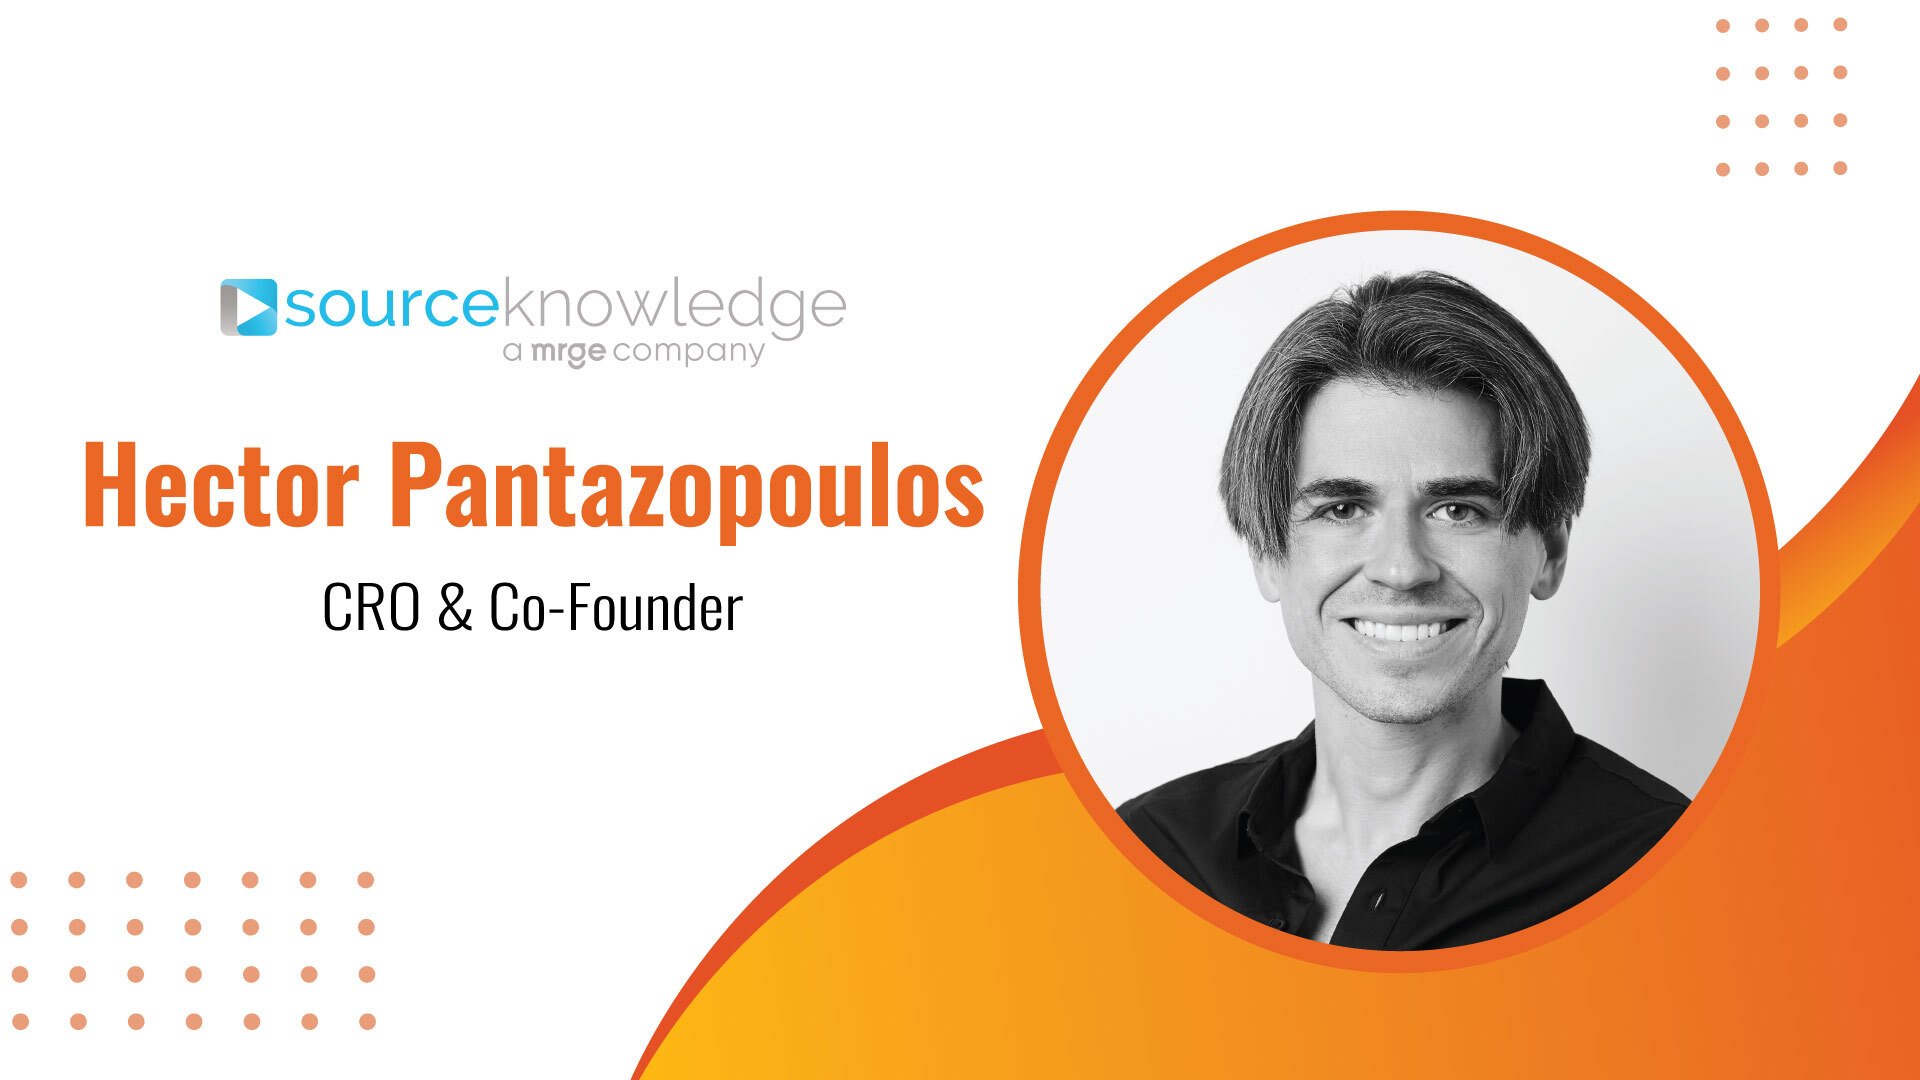 MarTech Edge Interview with Hector Pantazopoulos, CRO & Co-Founder, SourceKnowledge